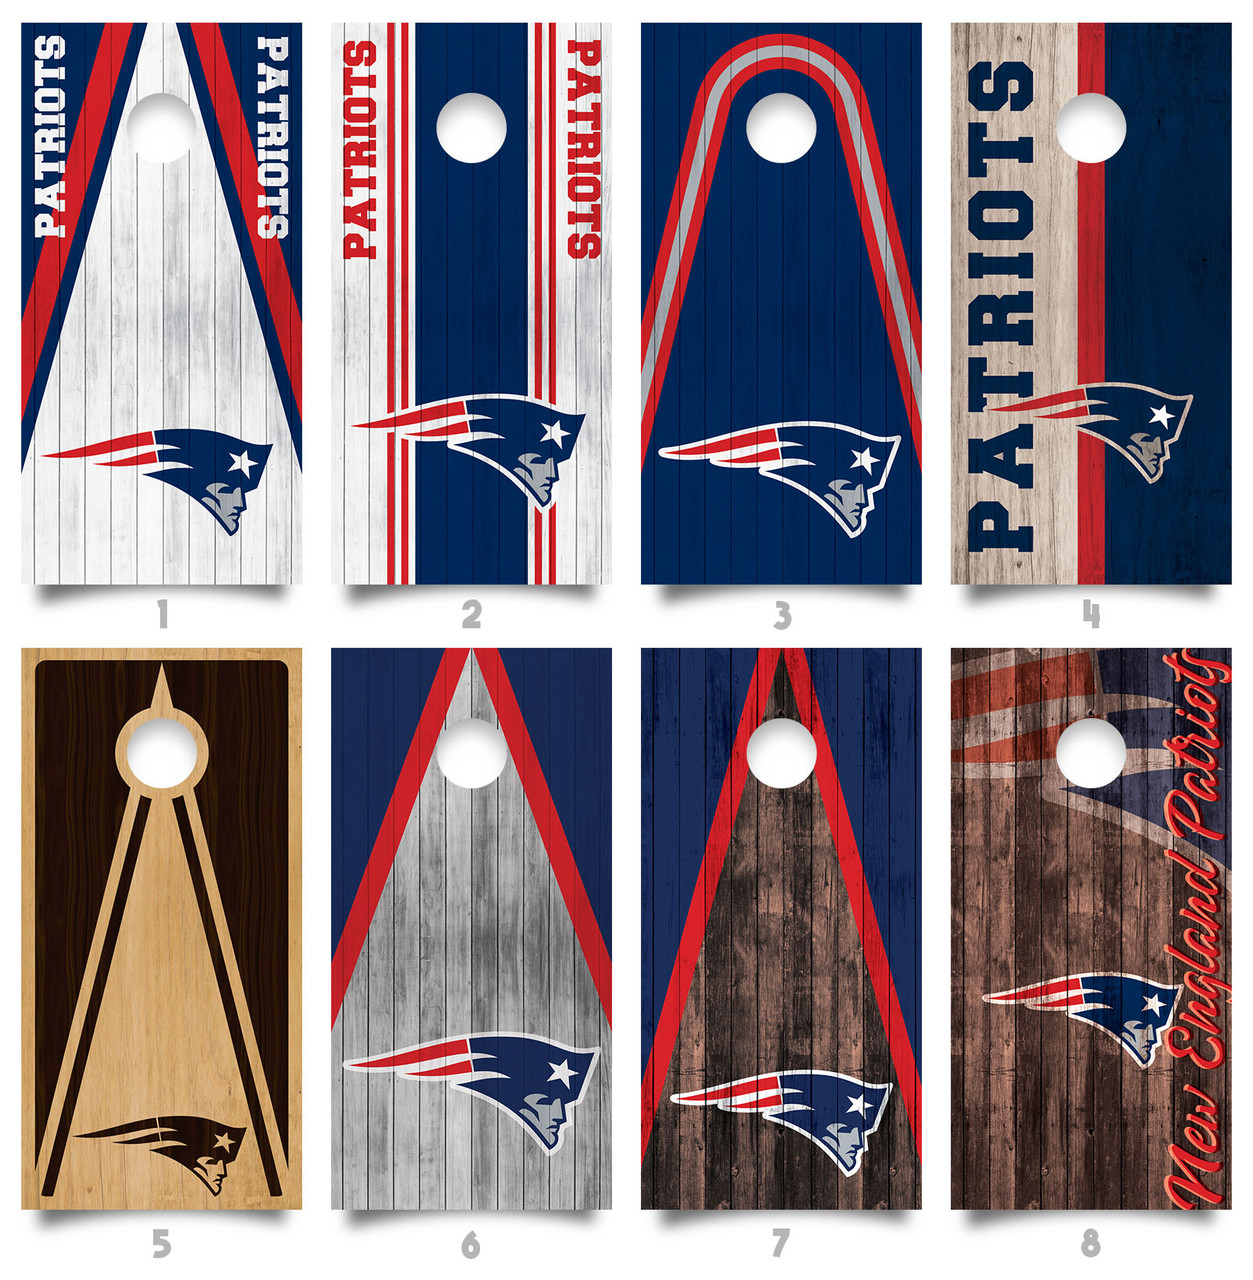 New England Patriots cornhole board or vehicle decal s 